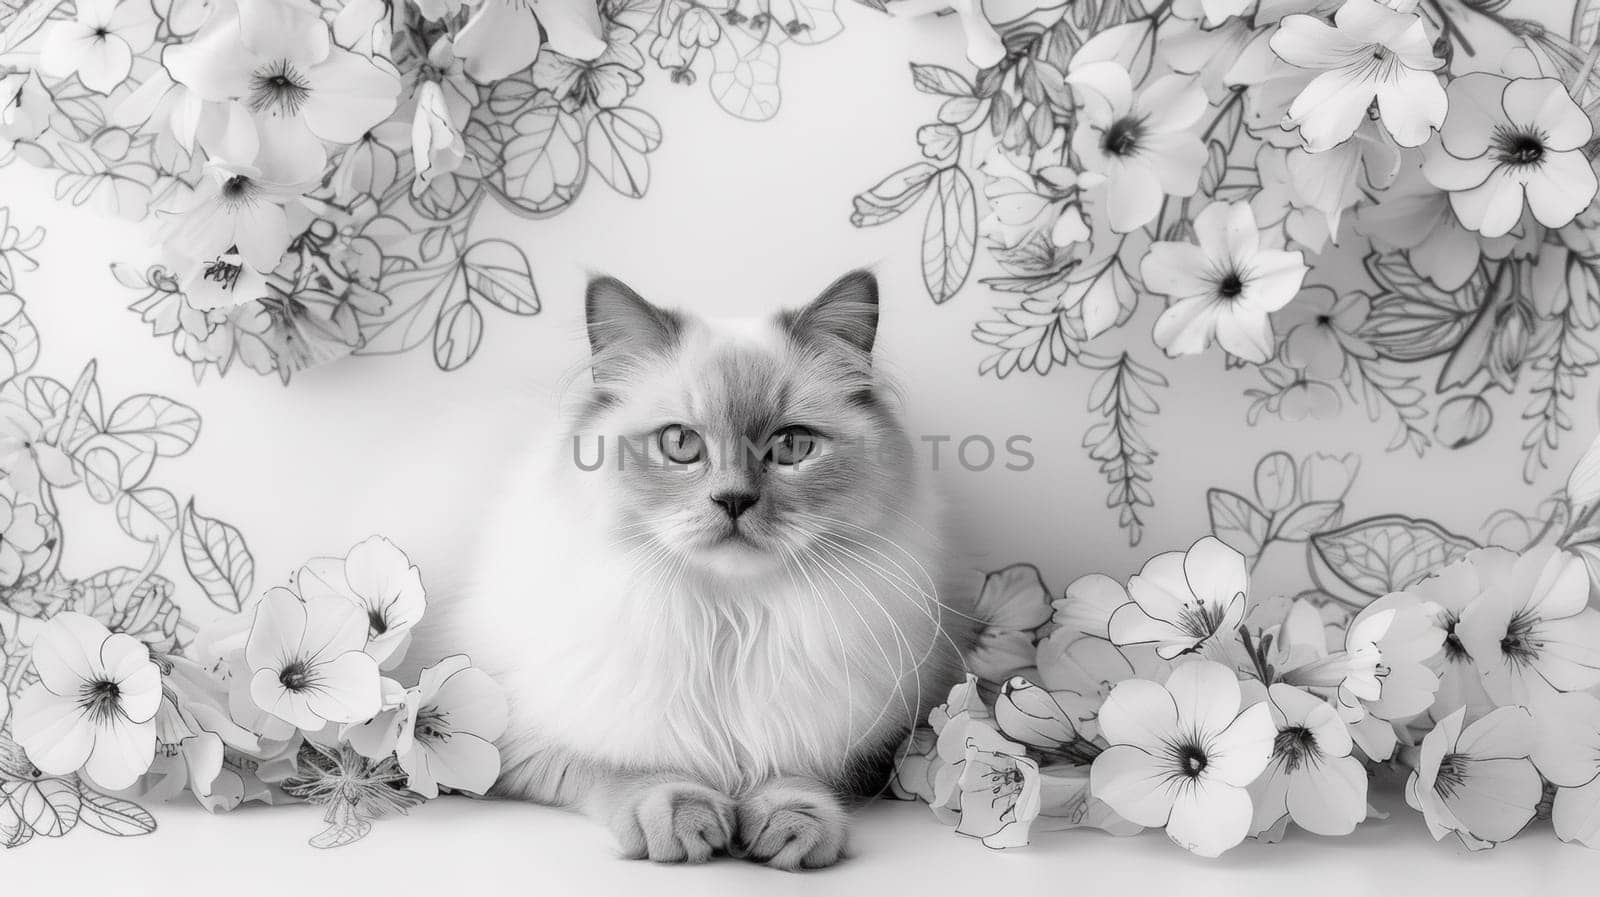 A cat sitting in front of a bunch of flowers